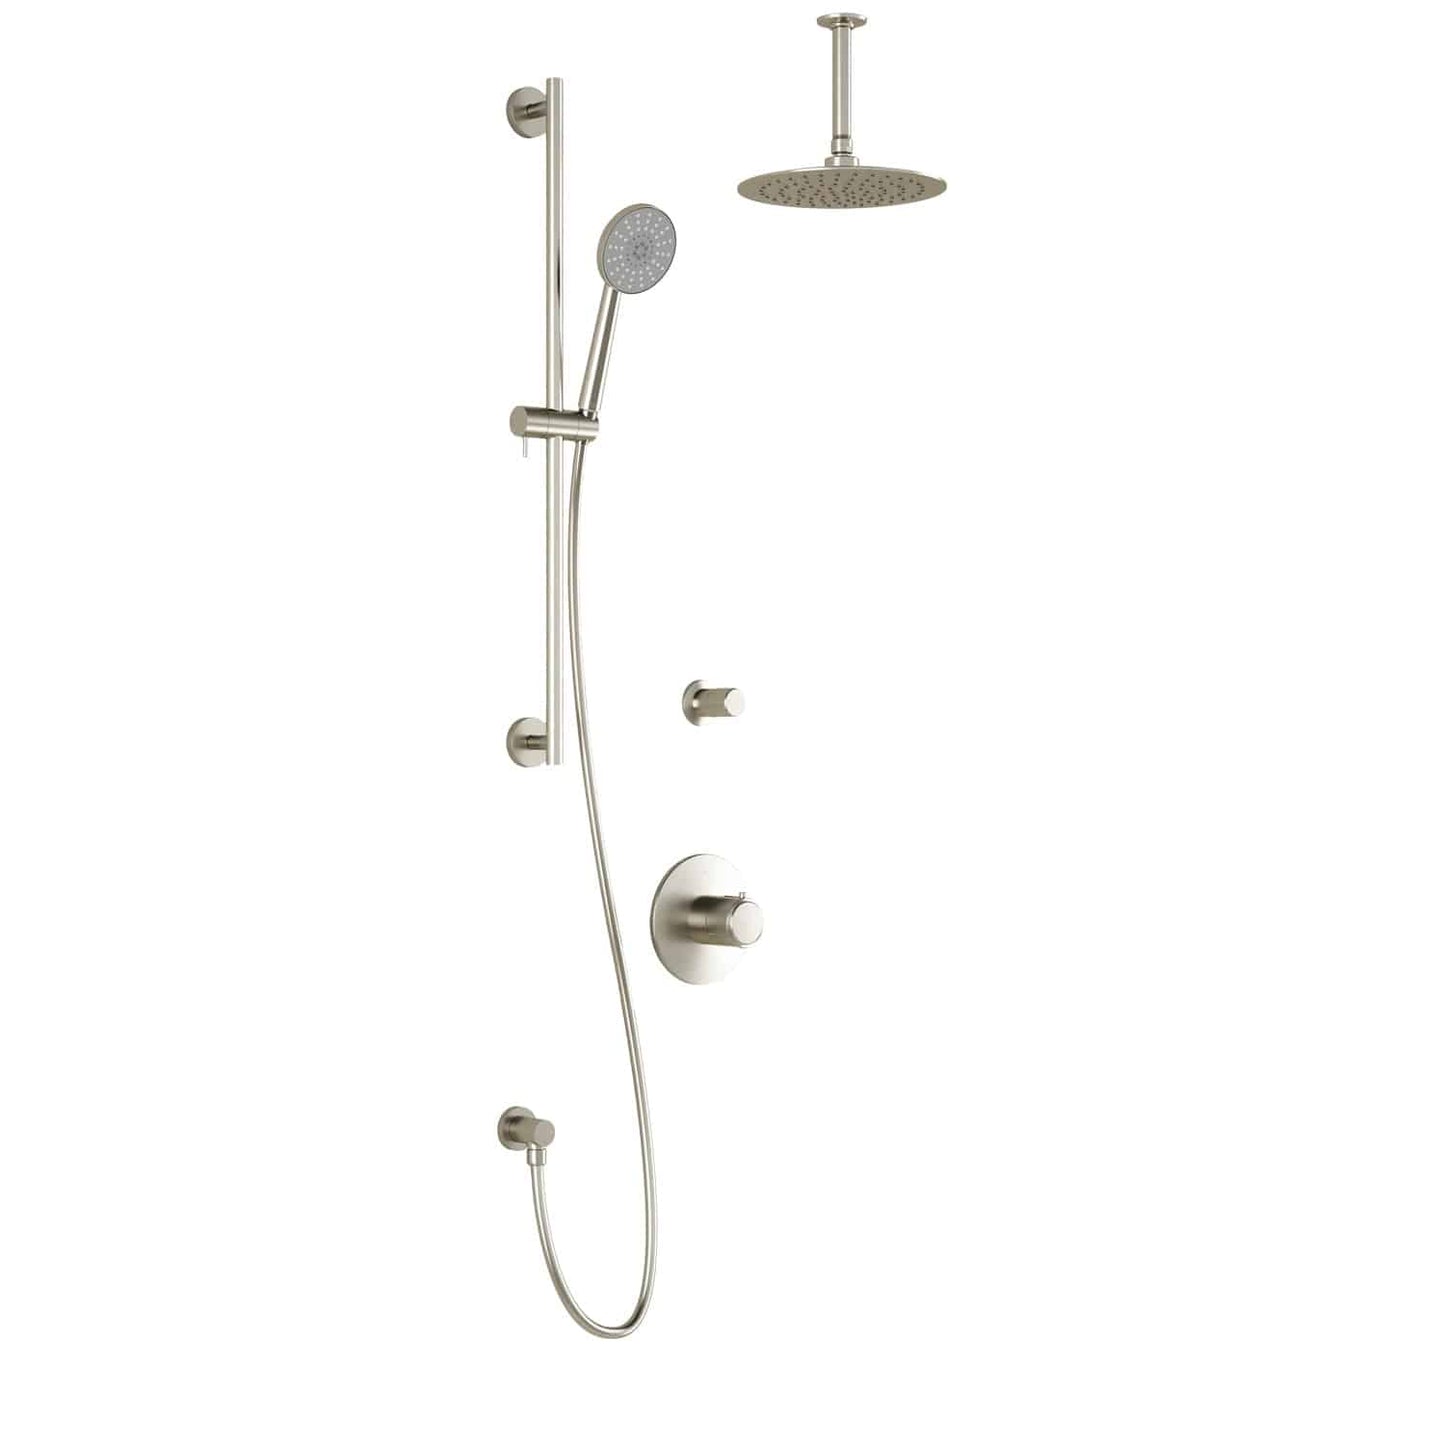 Kalia CITÉ TD2 AQUATONIK T/P Shower Kit System with Vertical Ceiling Arm and 9" Round Rain Shower Head- Brushed Nickel PVD